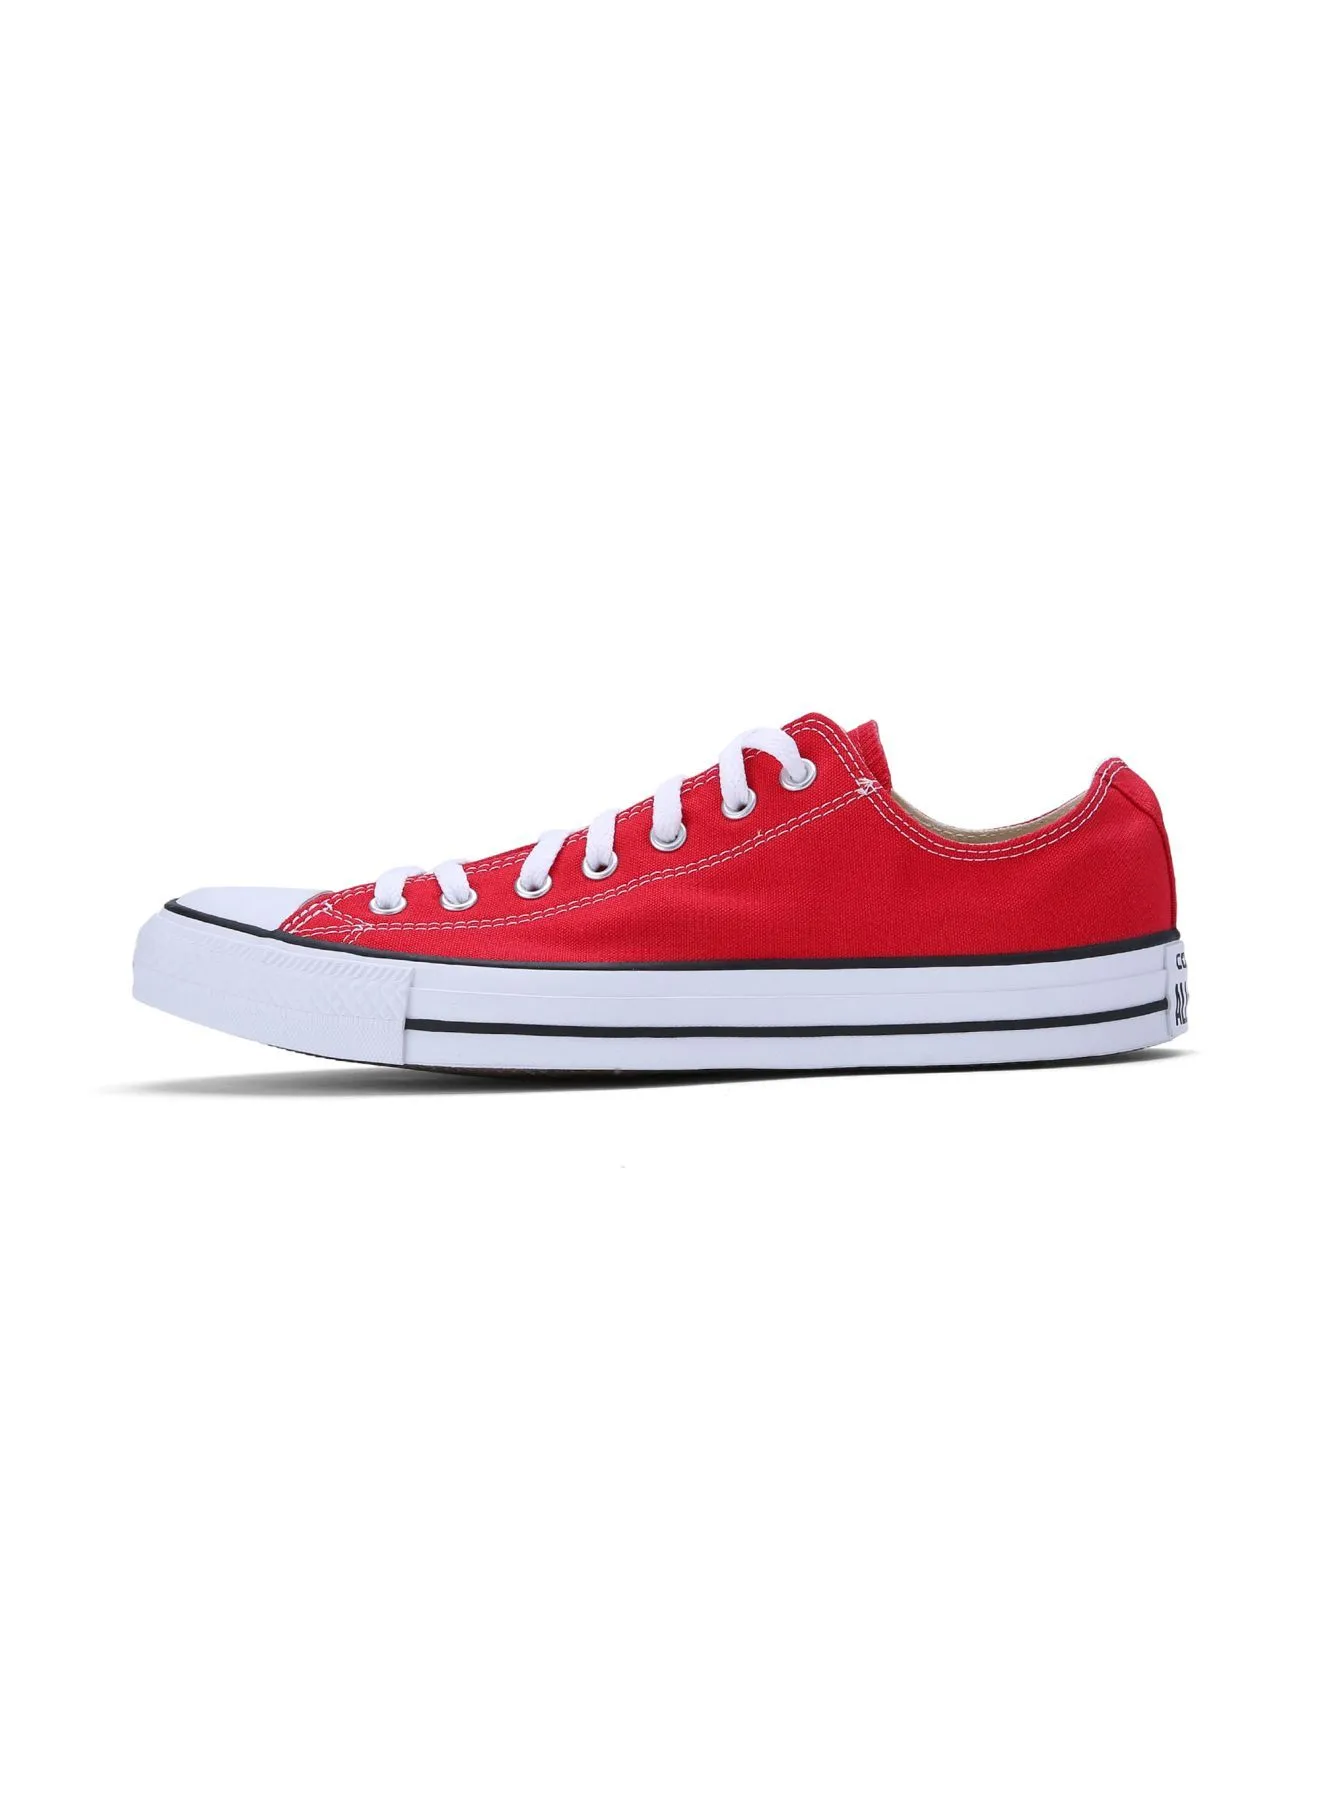 CONVERSE Chuck Taylor All Star Sneaker Red